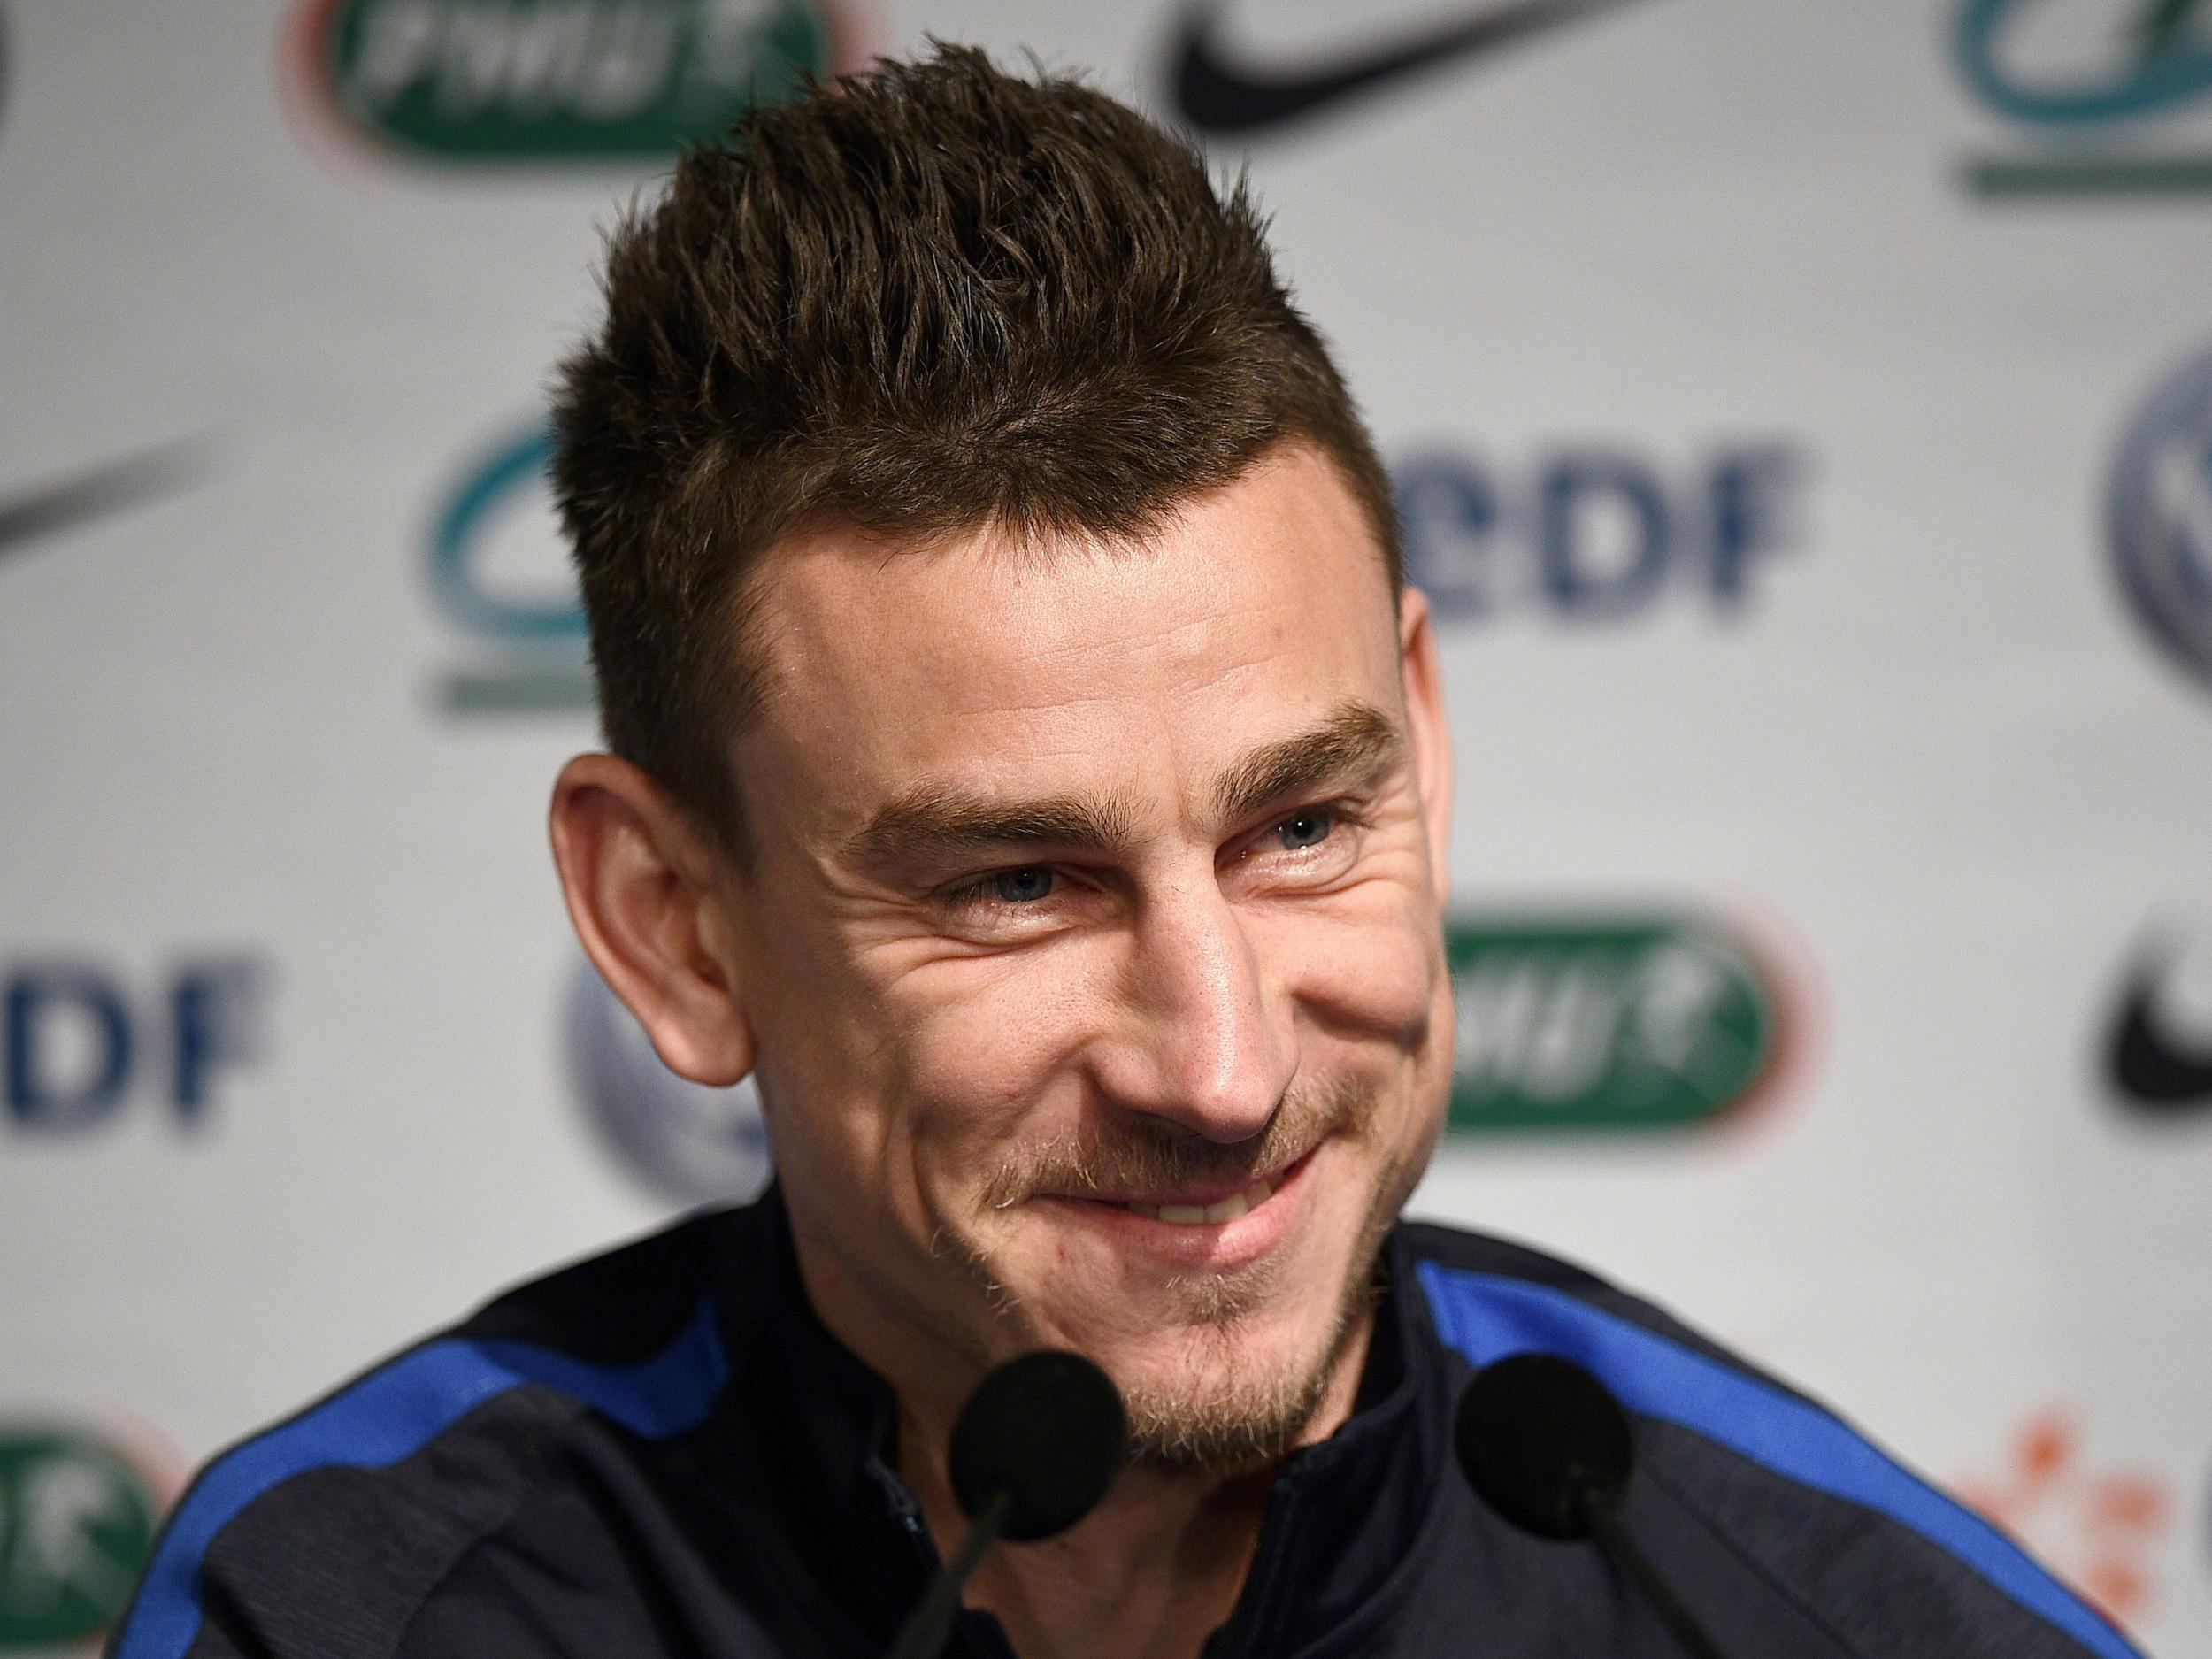 Koscielny has established himself as one of the continent's best centre-backs